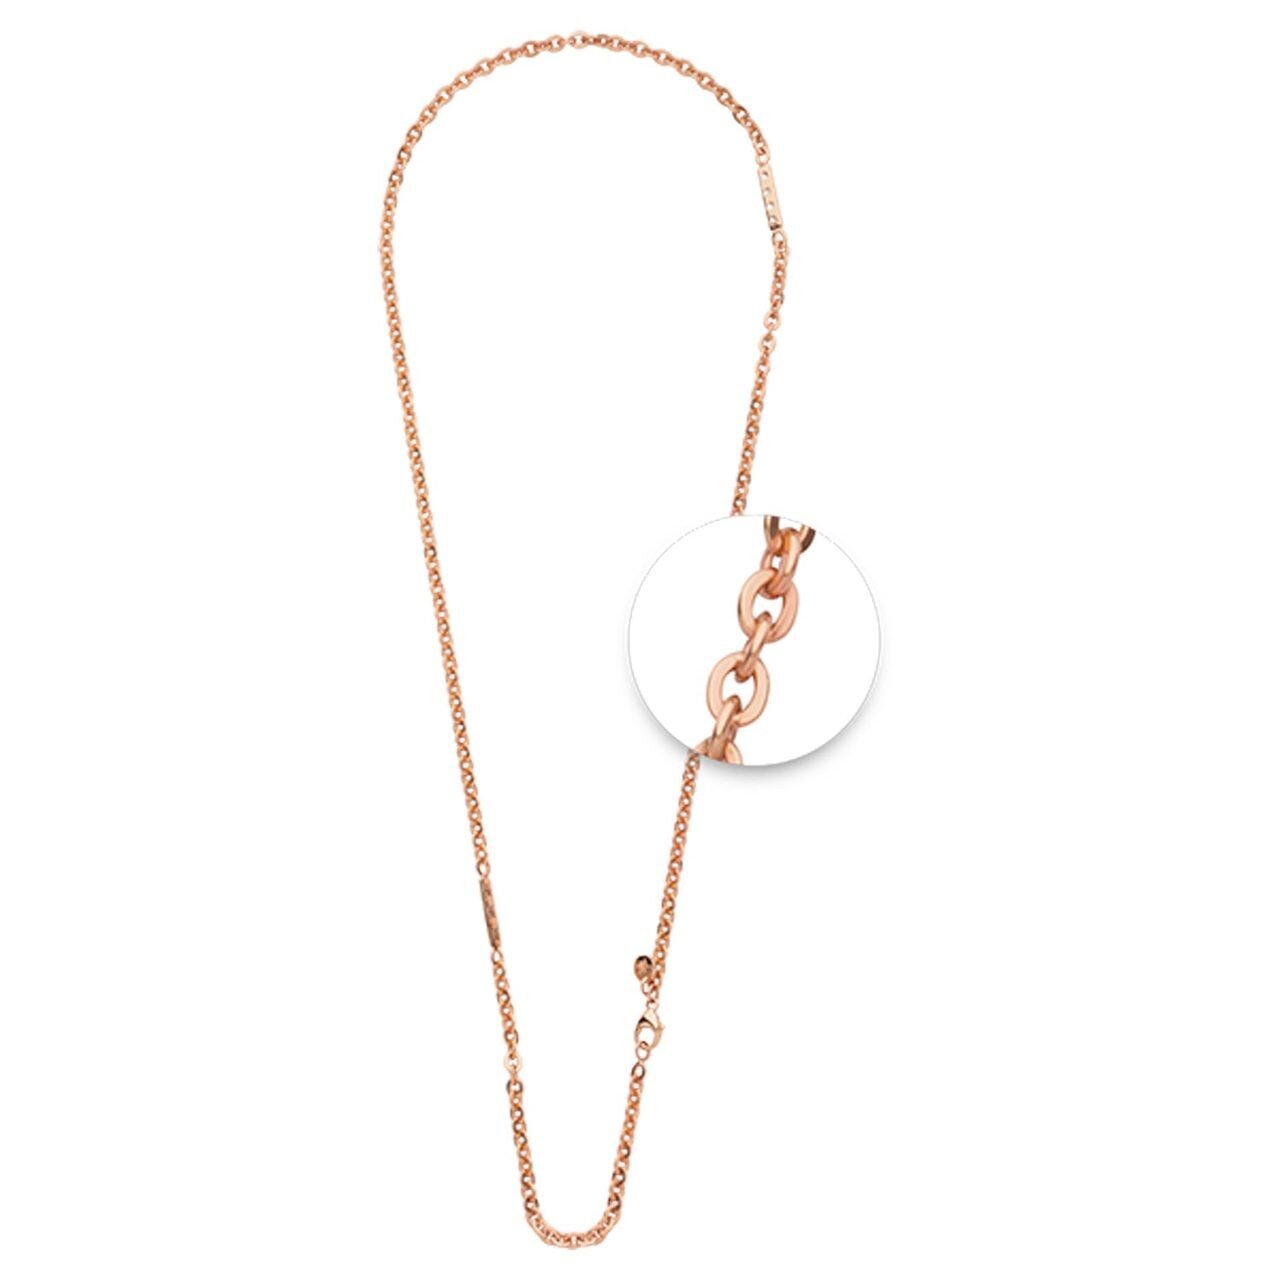 Nikki Lissoni Flattened Cable Chain 4 x 5mm with Statements Rose Gold-plated 60cm N1027RG60